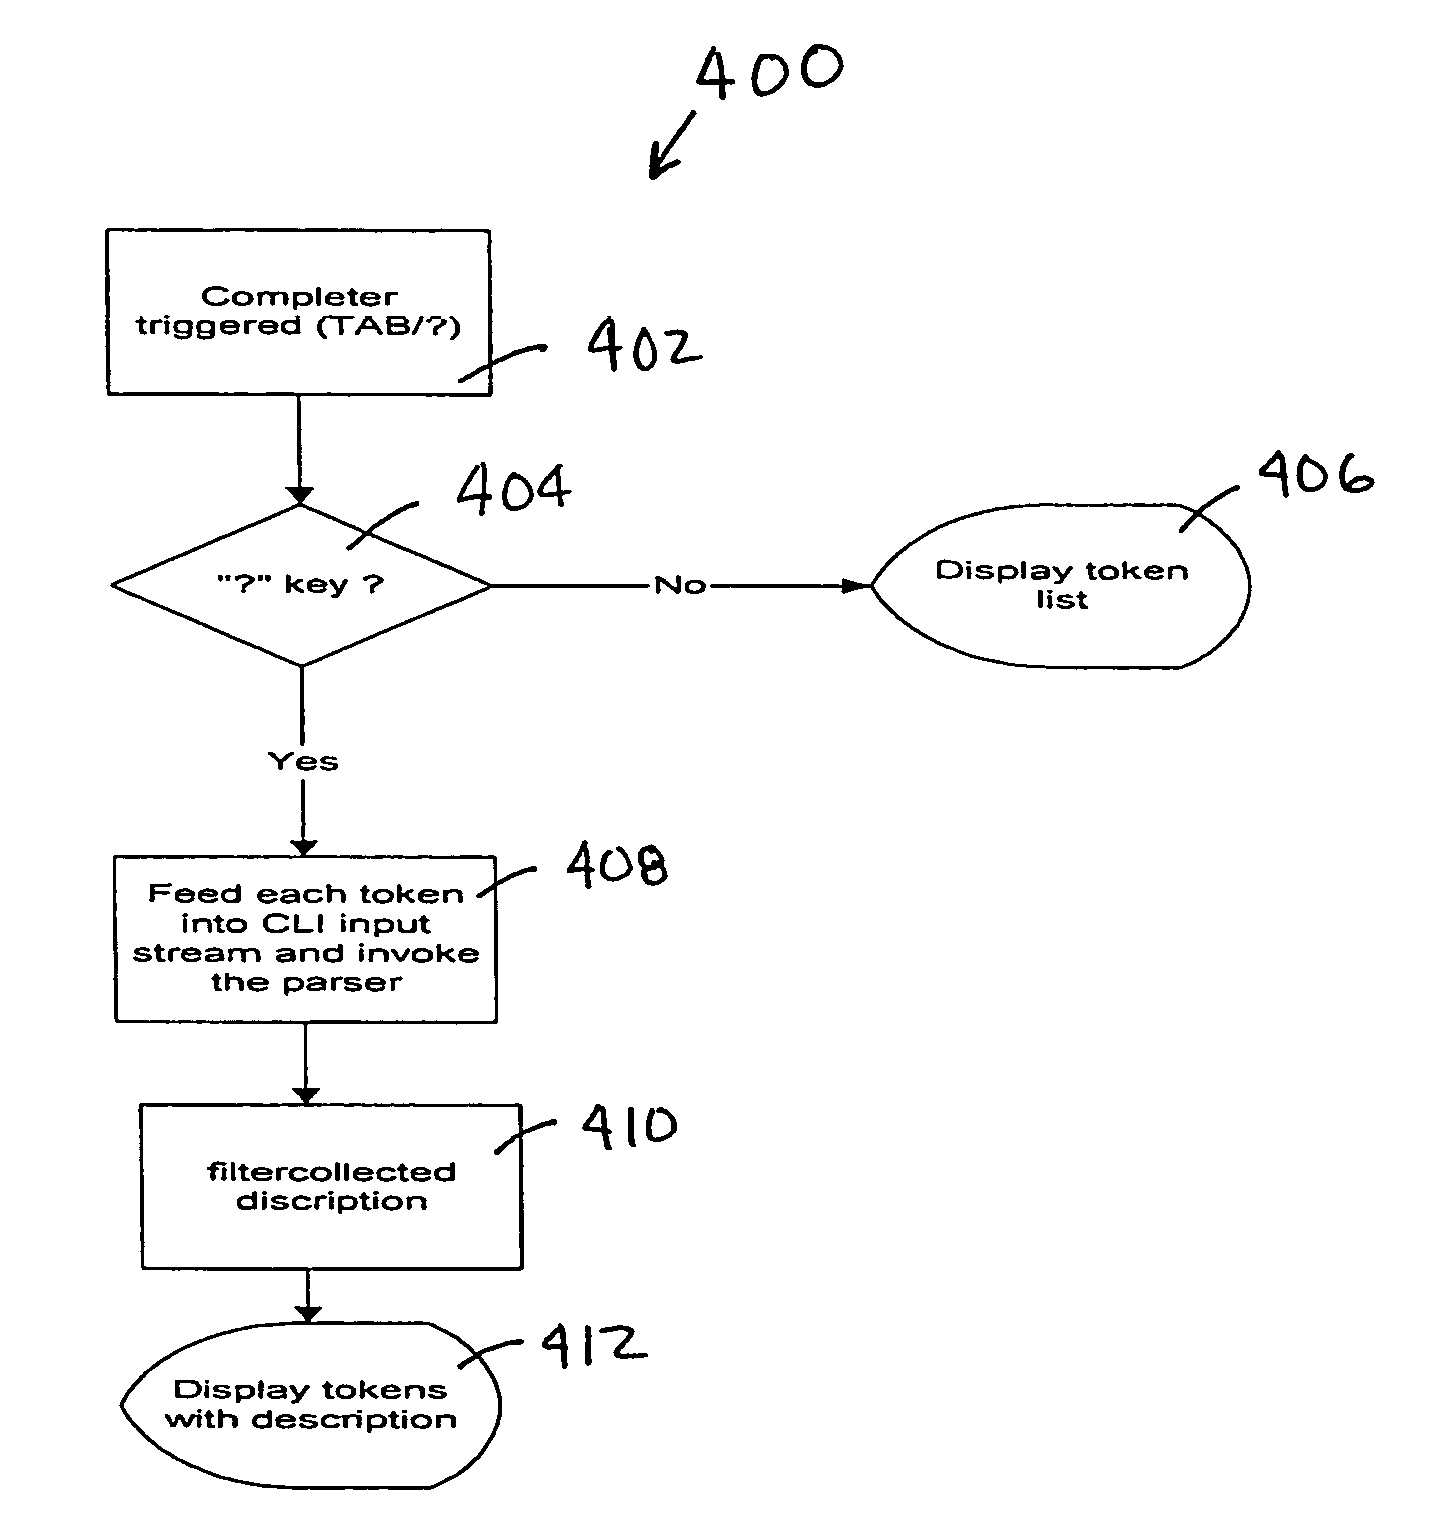 Command line interface in a communication system